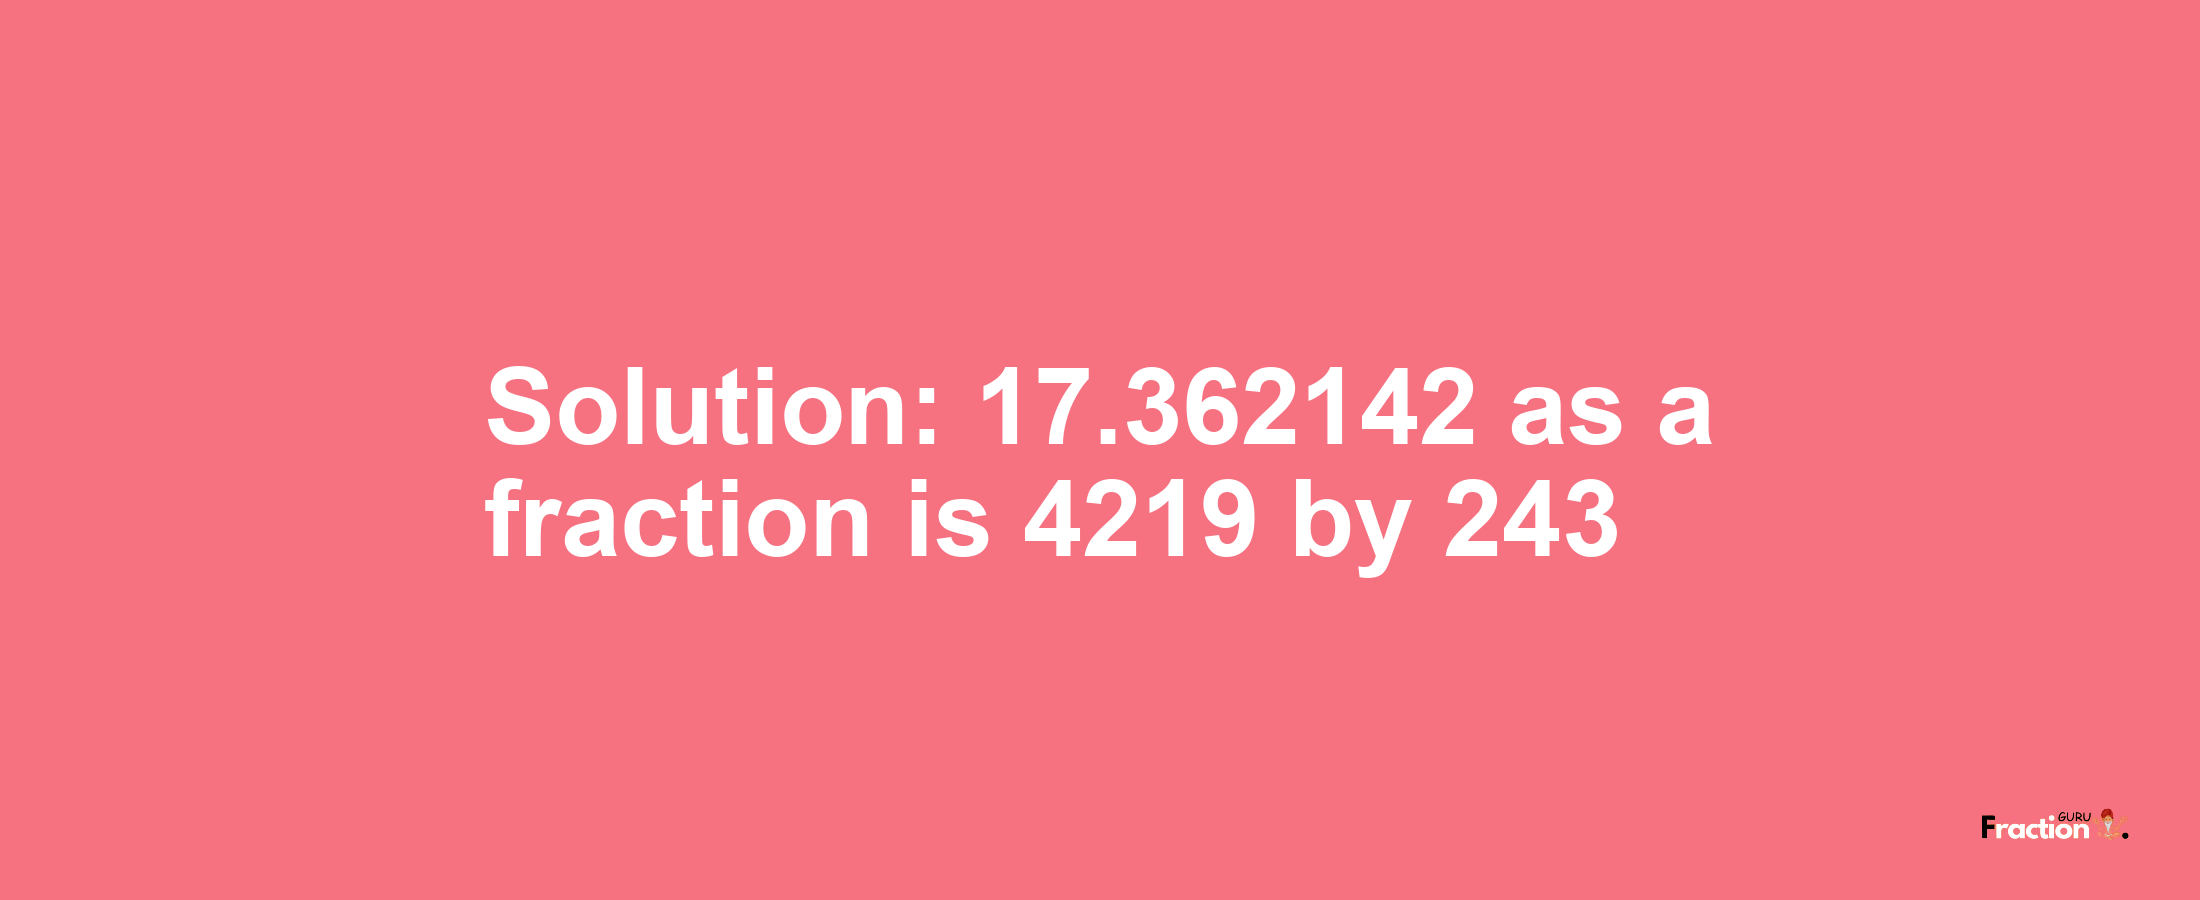 Solution:17.362142 as a fraction is 4219/243